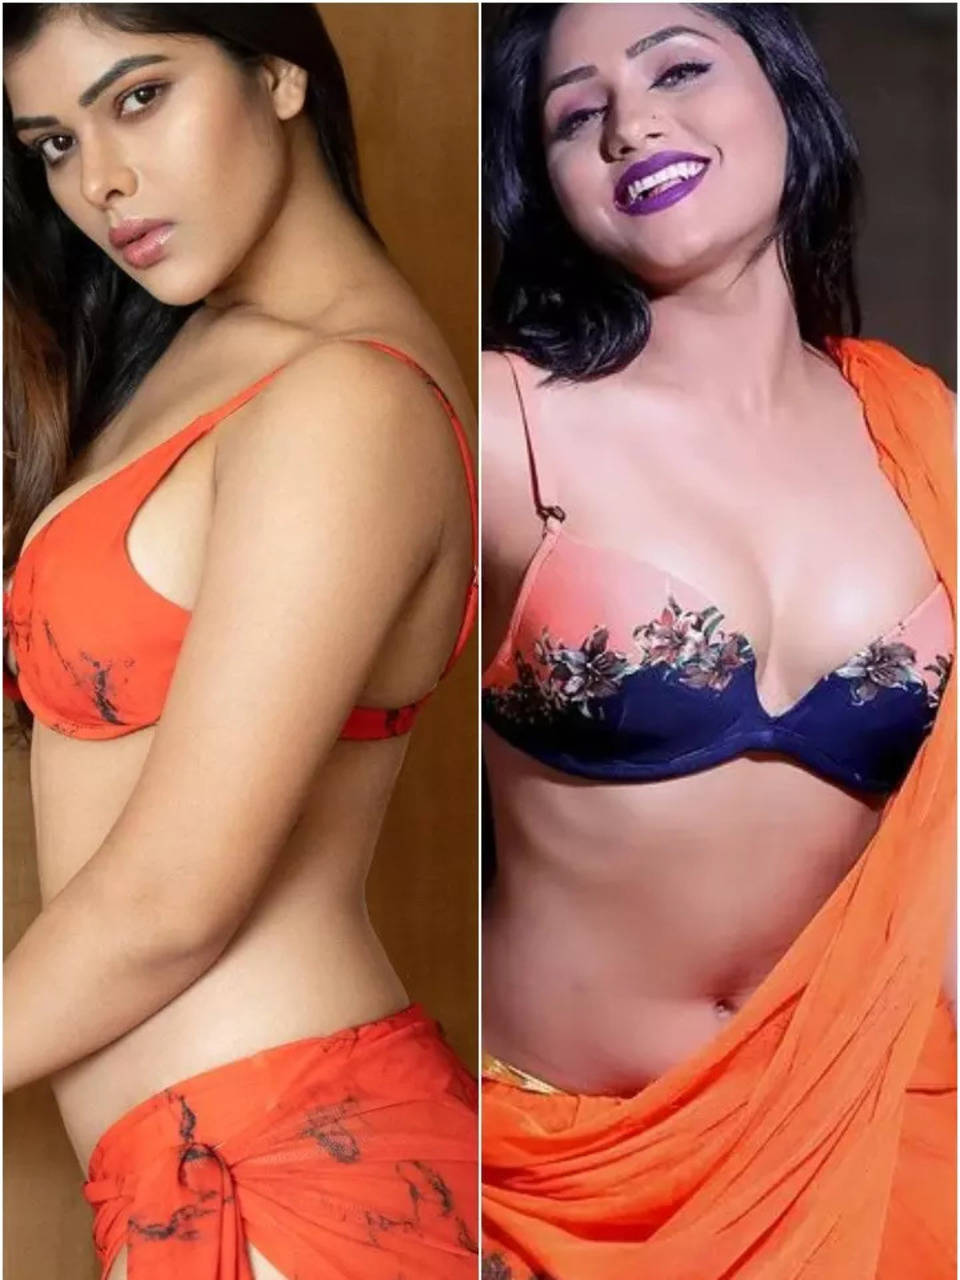 Bhojpuri actresses who scorched up Insta in orange outfits | Times of India